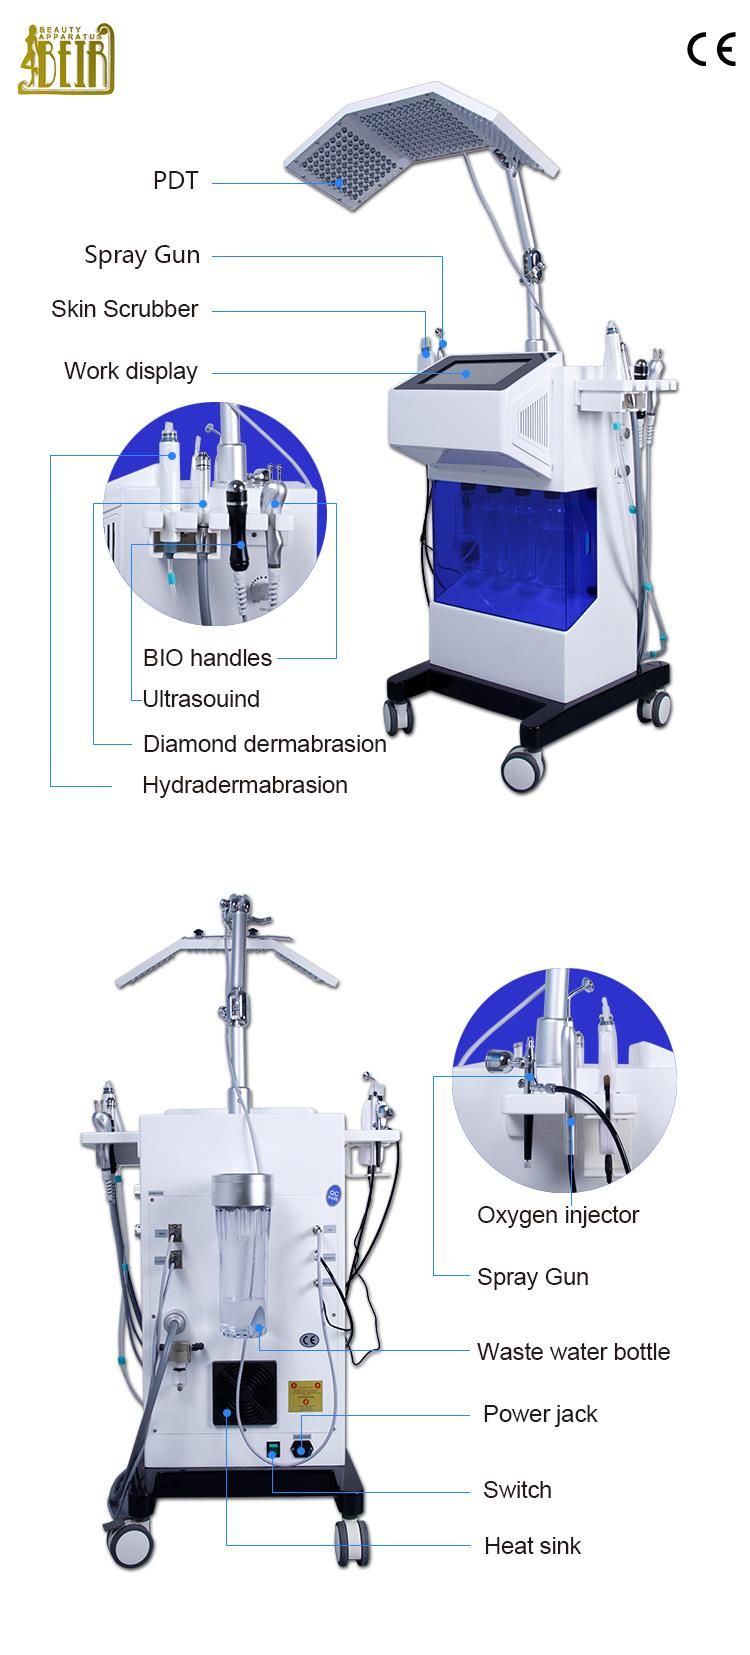 New Hydra Dermabrasion Personal Skin Care Face Cleaner Machine